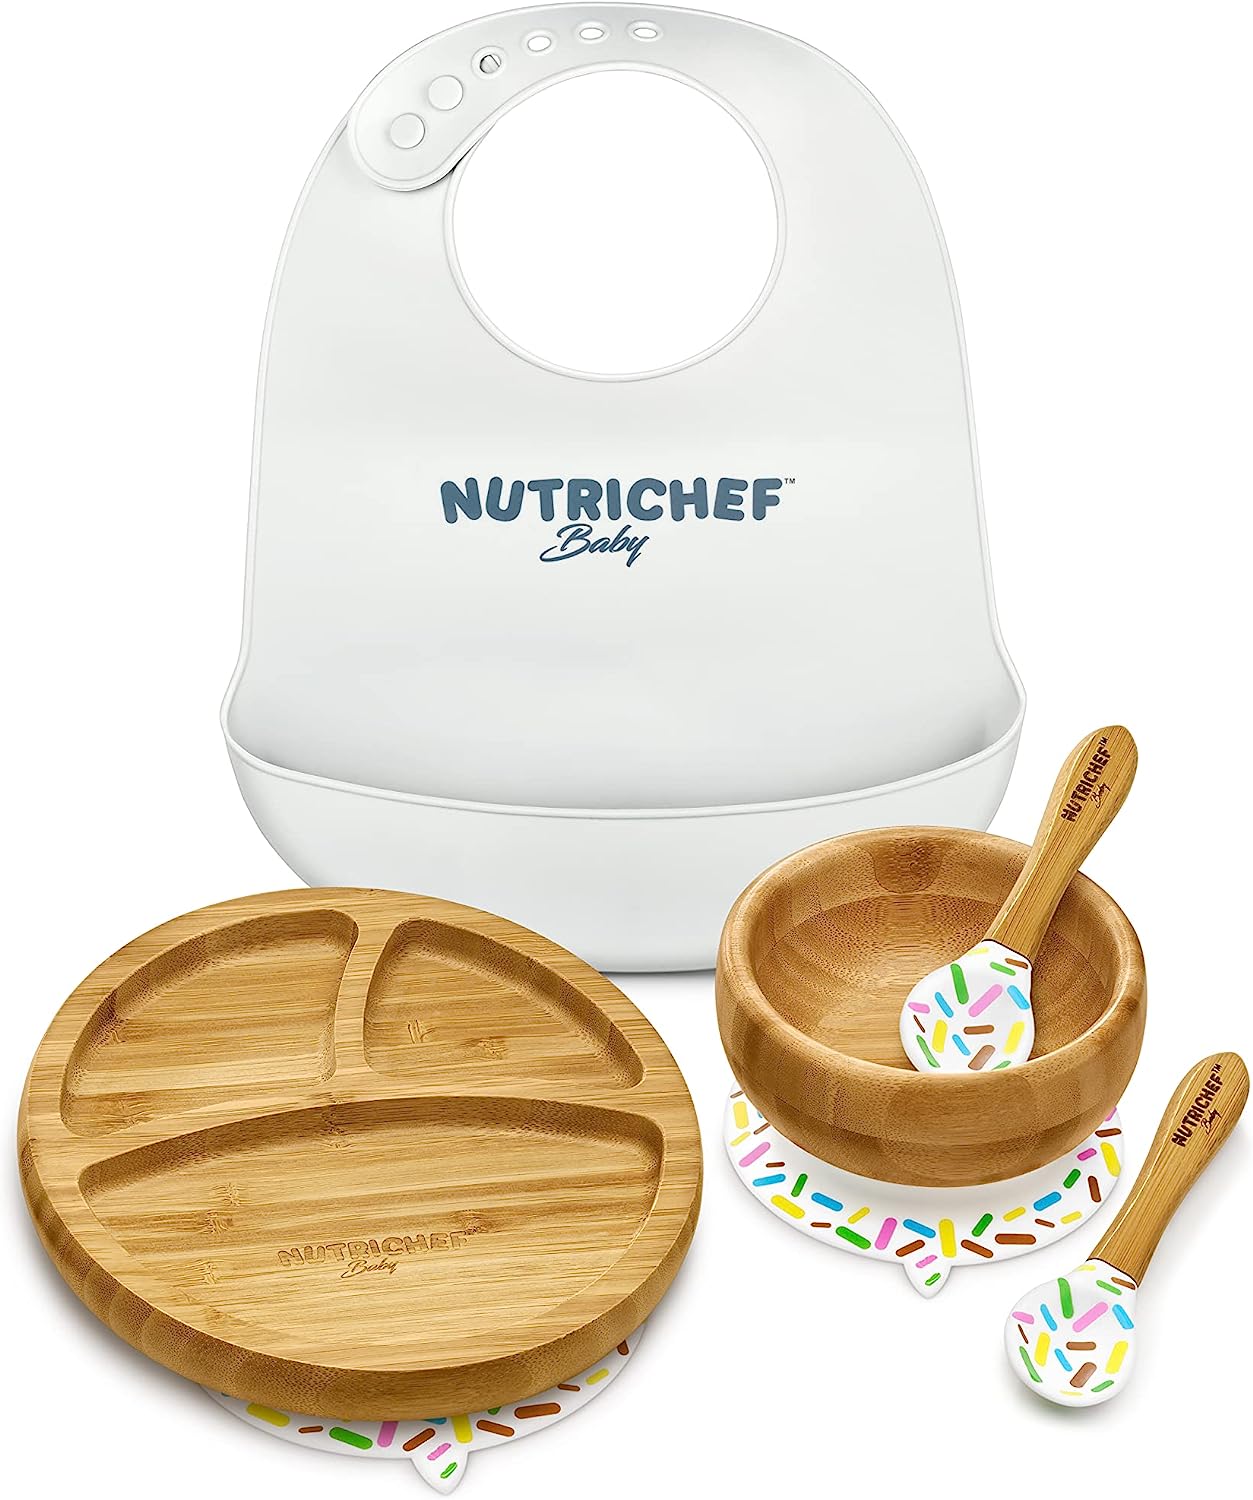 NutriChef Baby Feeding Set: Bamboo Plate, Bowl & Spoon with Silicon Bib $22 + Free Shipping w/ Prime or $25+ orders